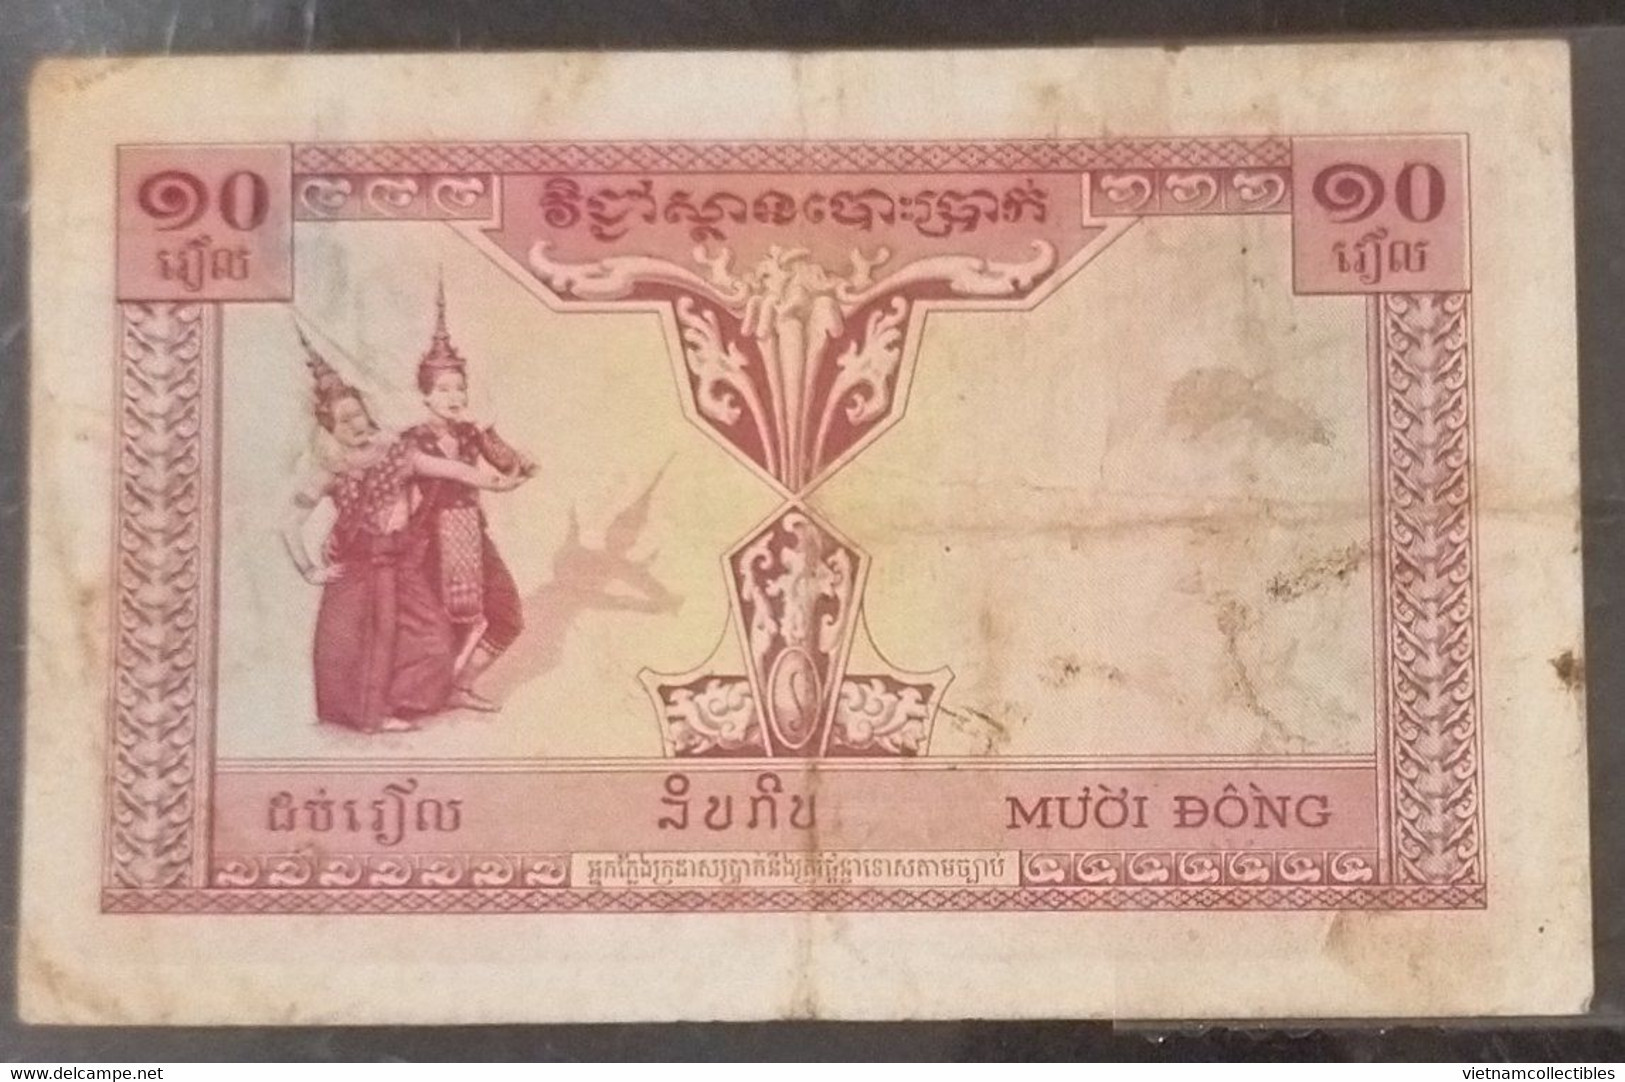 French Indochine Indochina Vietnam Viet Nam Laos Cambodia 1 Piastre VF Banknote Note 1953 - Pick # 96a / 2 Photos - Indocina